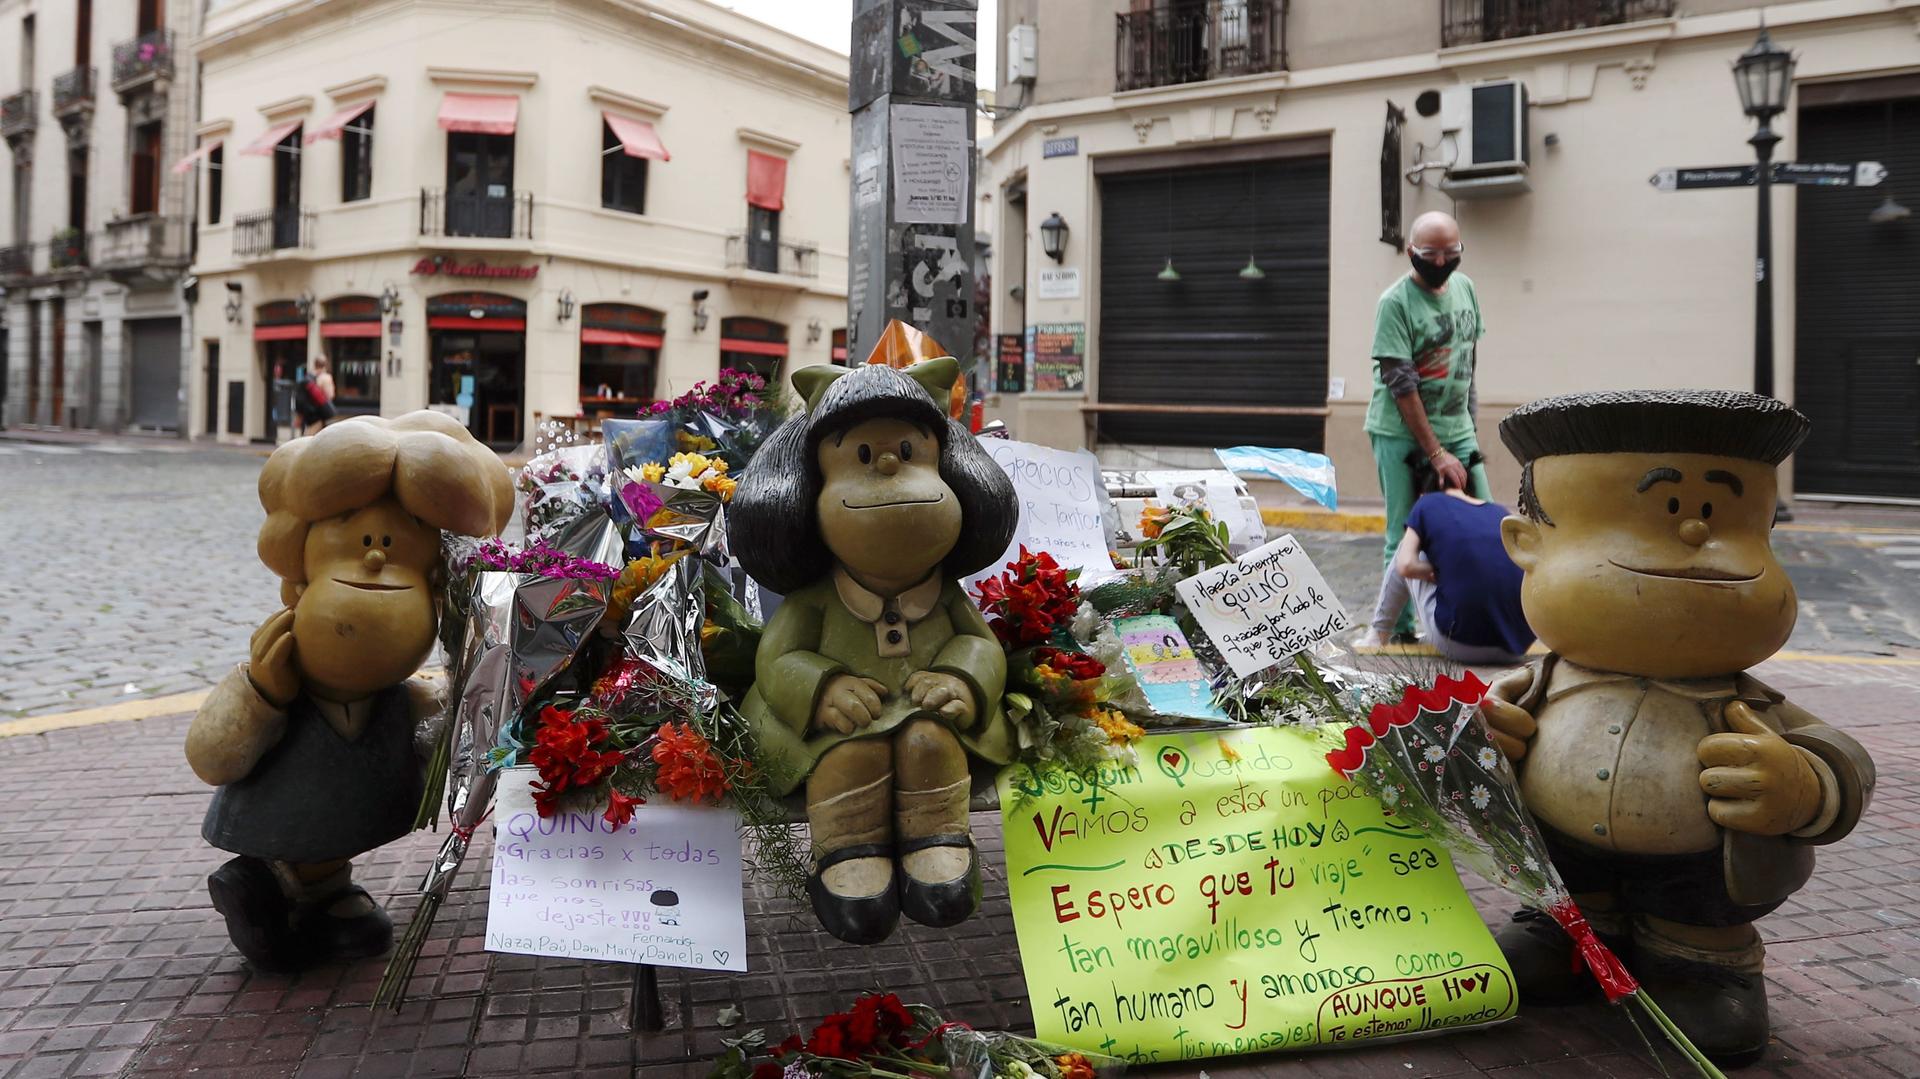 A woman mourns the death of cartoonist Joaquin Salvador Lavado, also known as Quino, who died yesterday at the age of 88, as flowers and tributes are seen next to sculptures of comic characters Mafalda, Susanita, and Manolito, created by him, in Buenos Ai